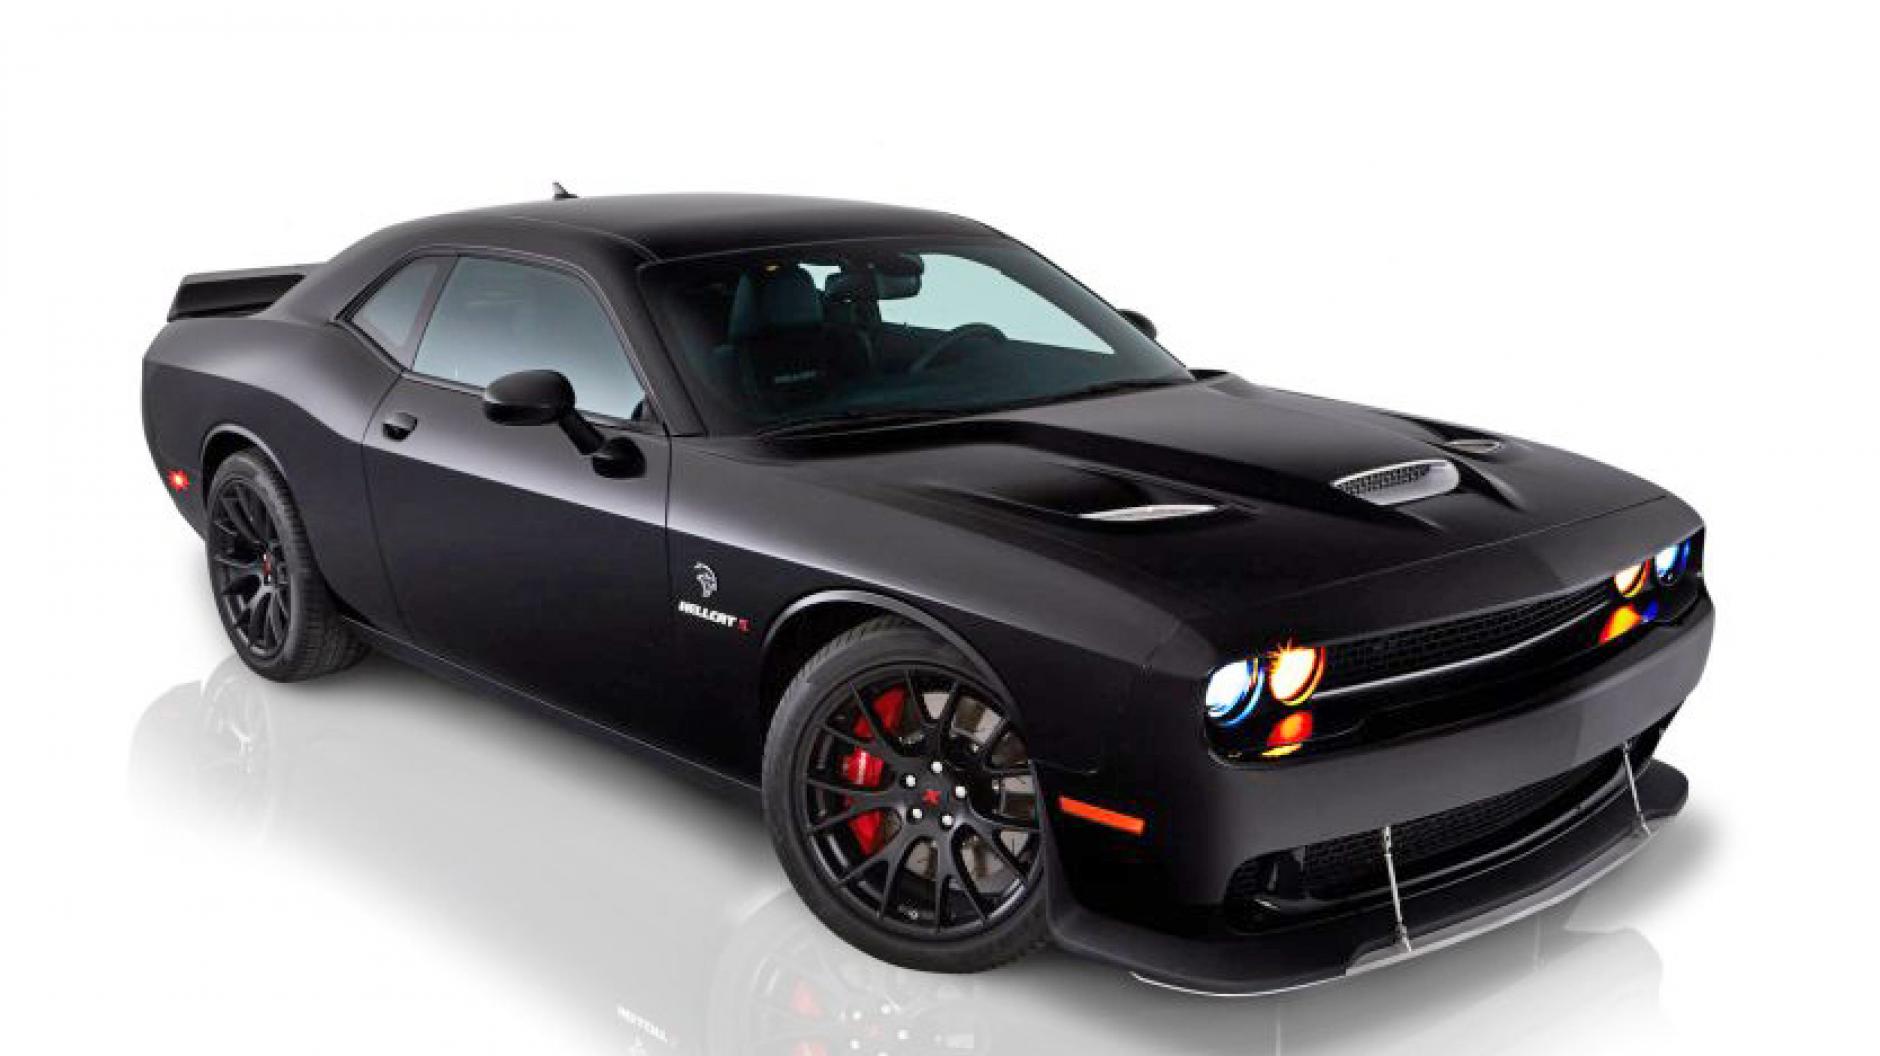 Published July 30 2015 Tags Hellcat Hellcat Challenger